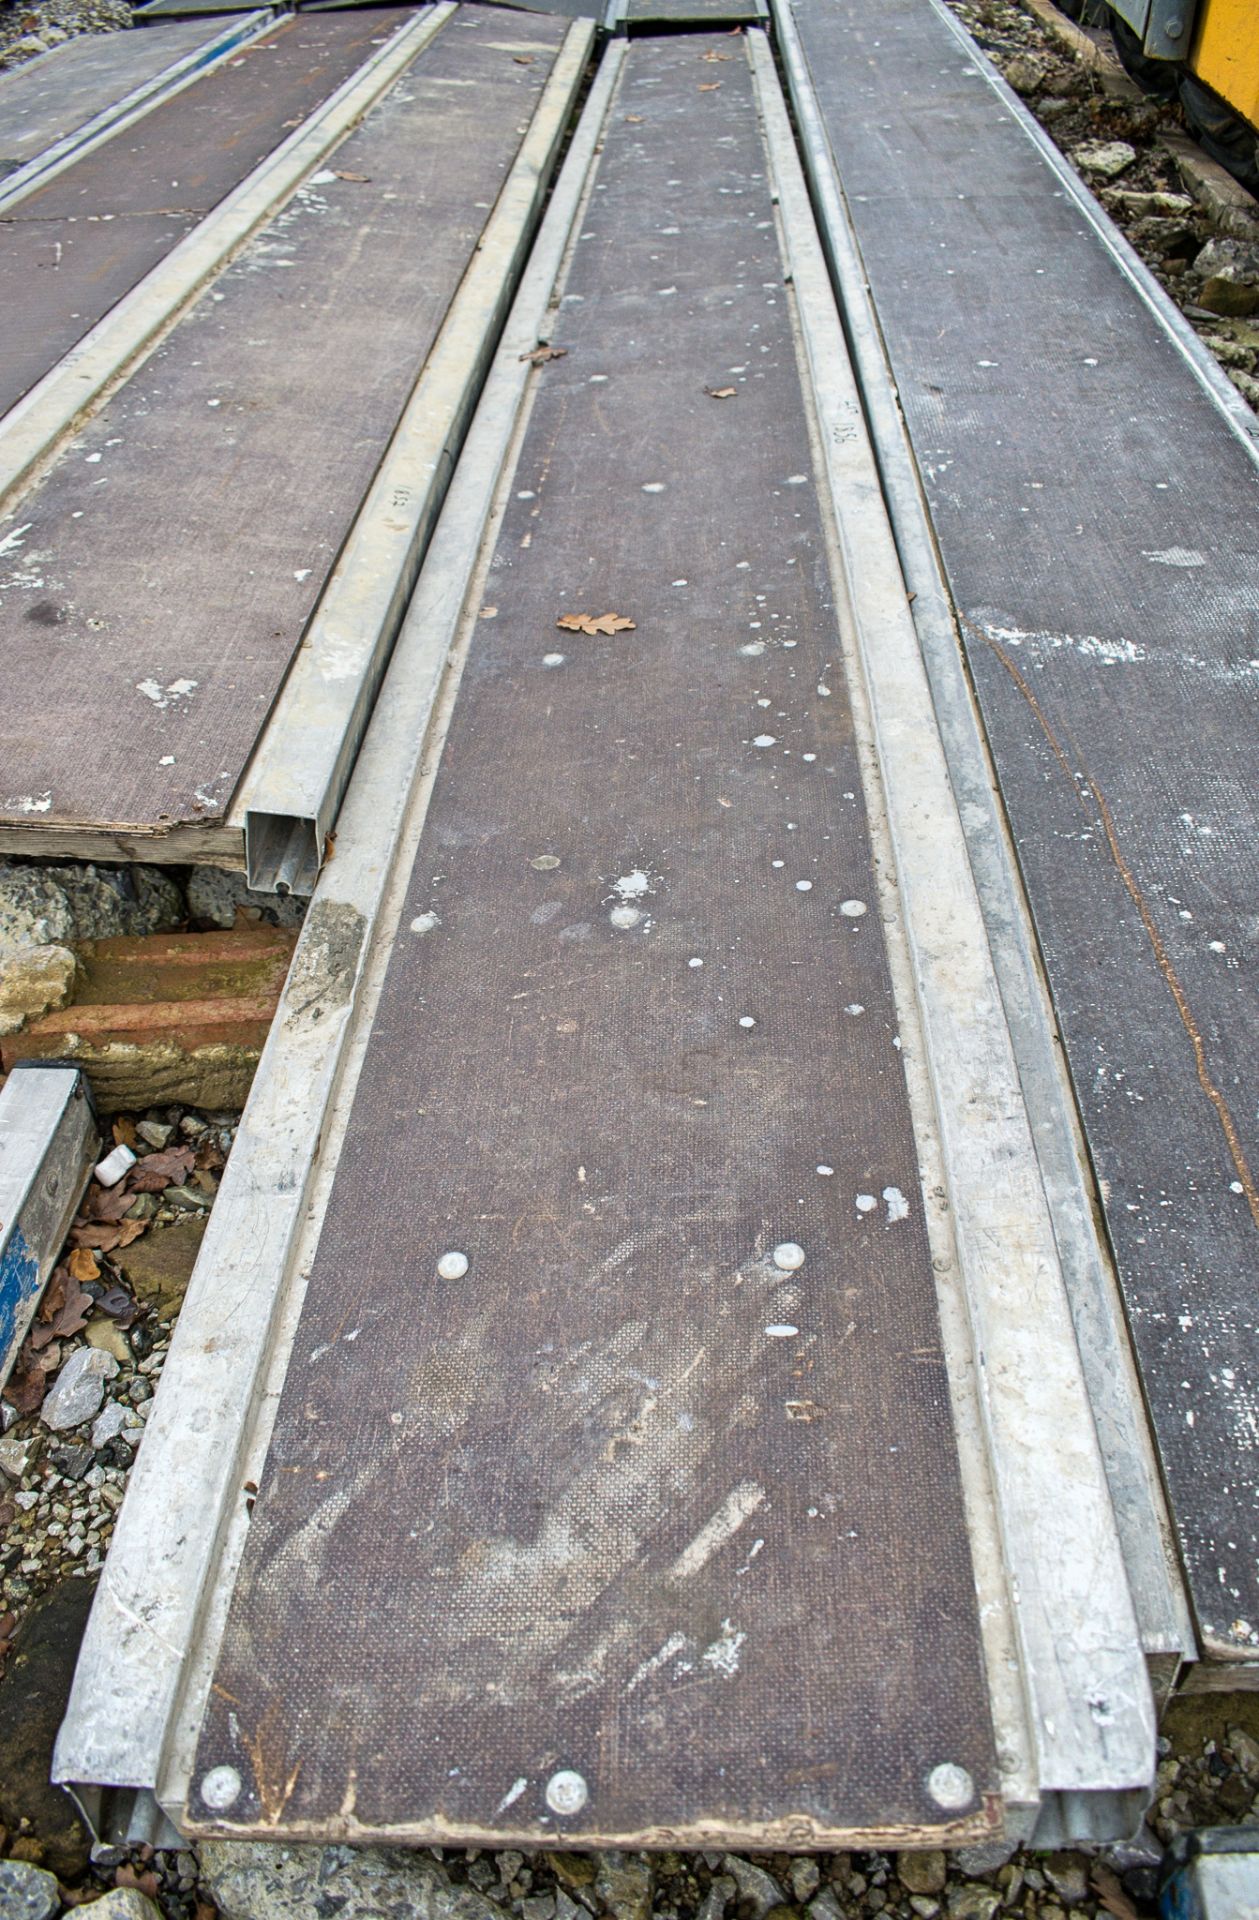 Aluminium staging board approximately 16ft long